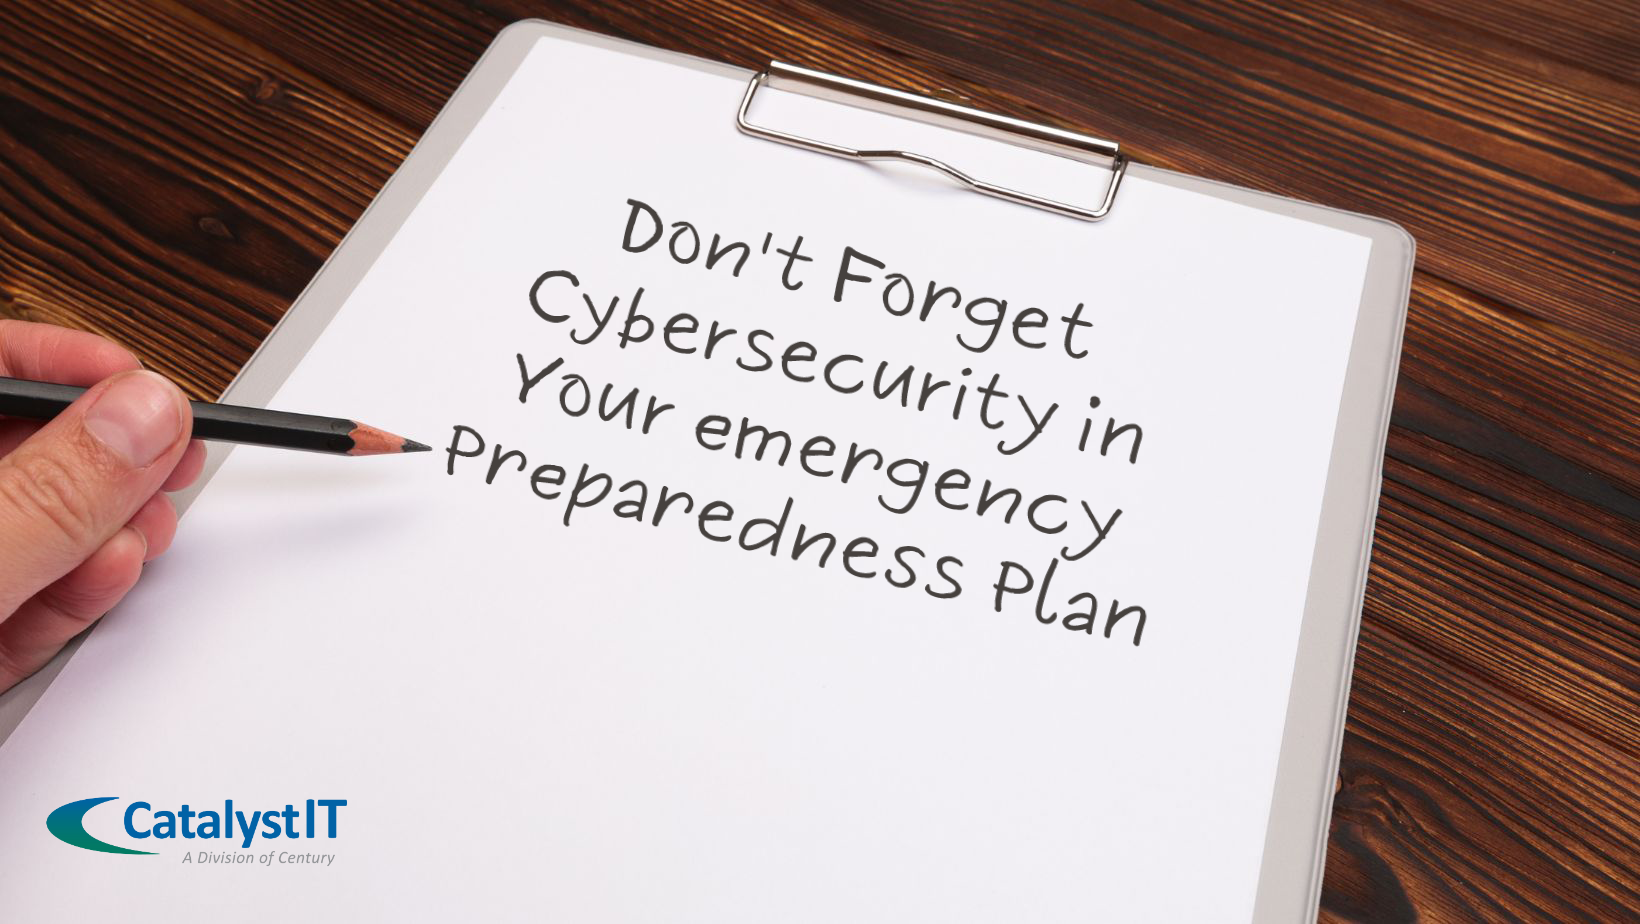 Don’t Forget Cybersecurity in Your Emergency Preparedness (1)